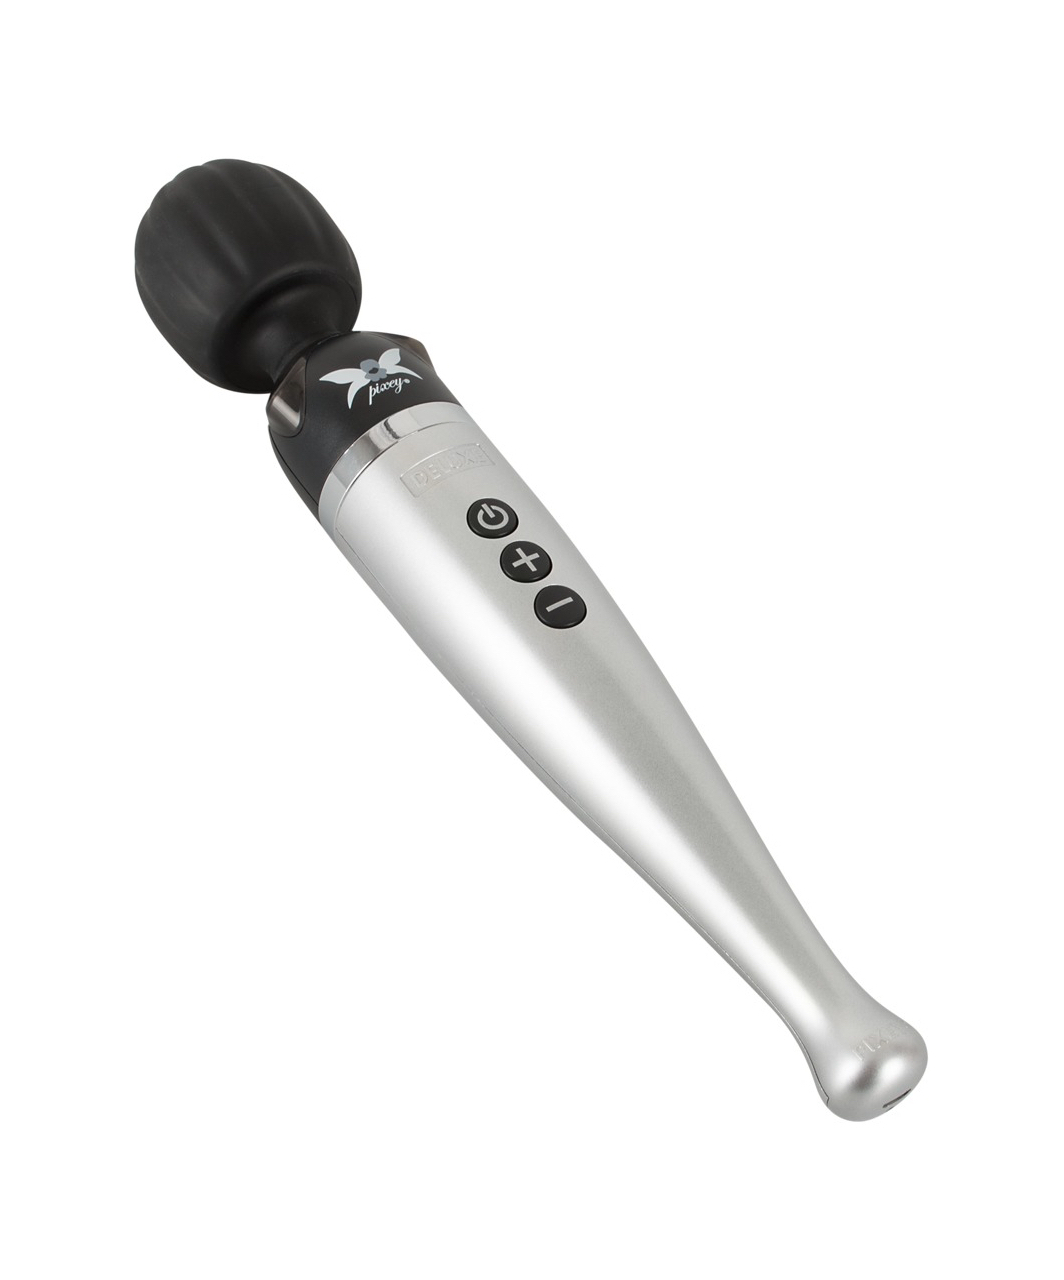 Pixey Deluxe Rechargeable Wand